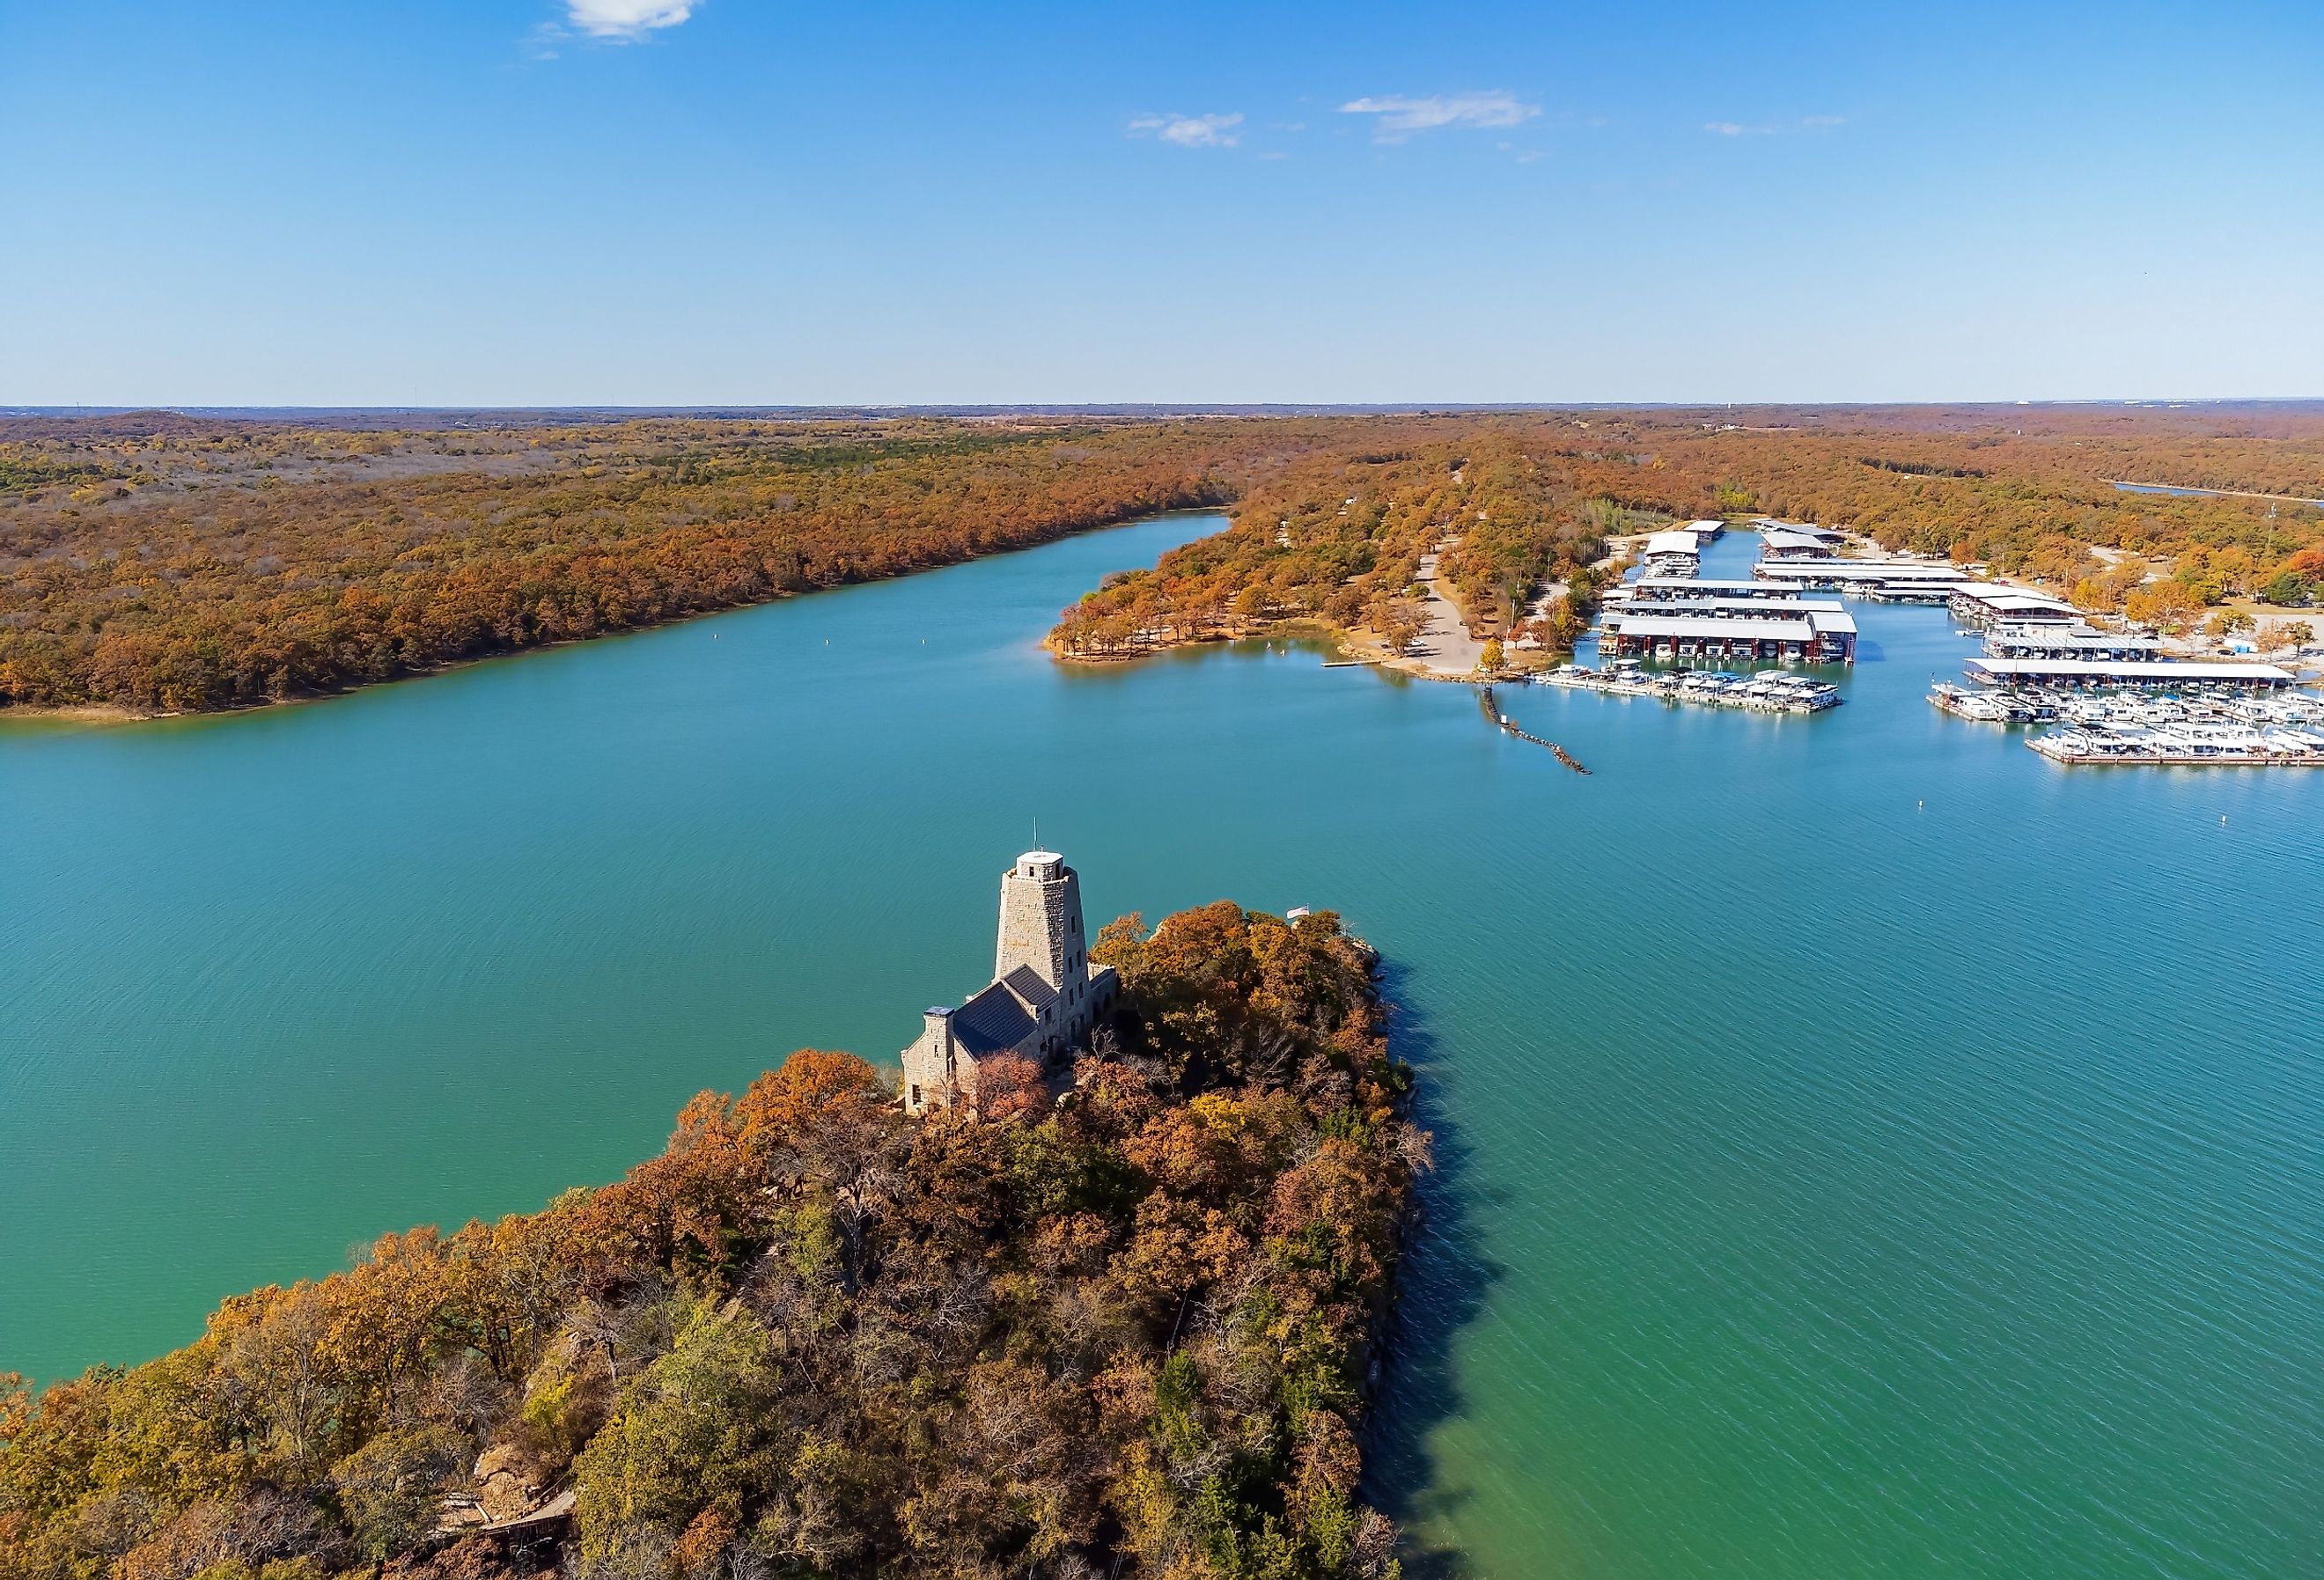 Aerial view of the Tucker Tower of Lake Murray State Park at Oklahoma.